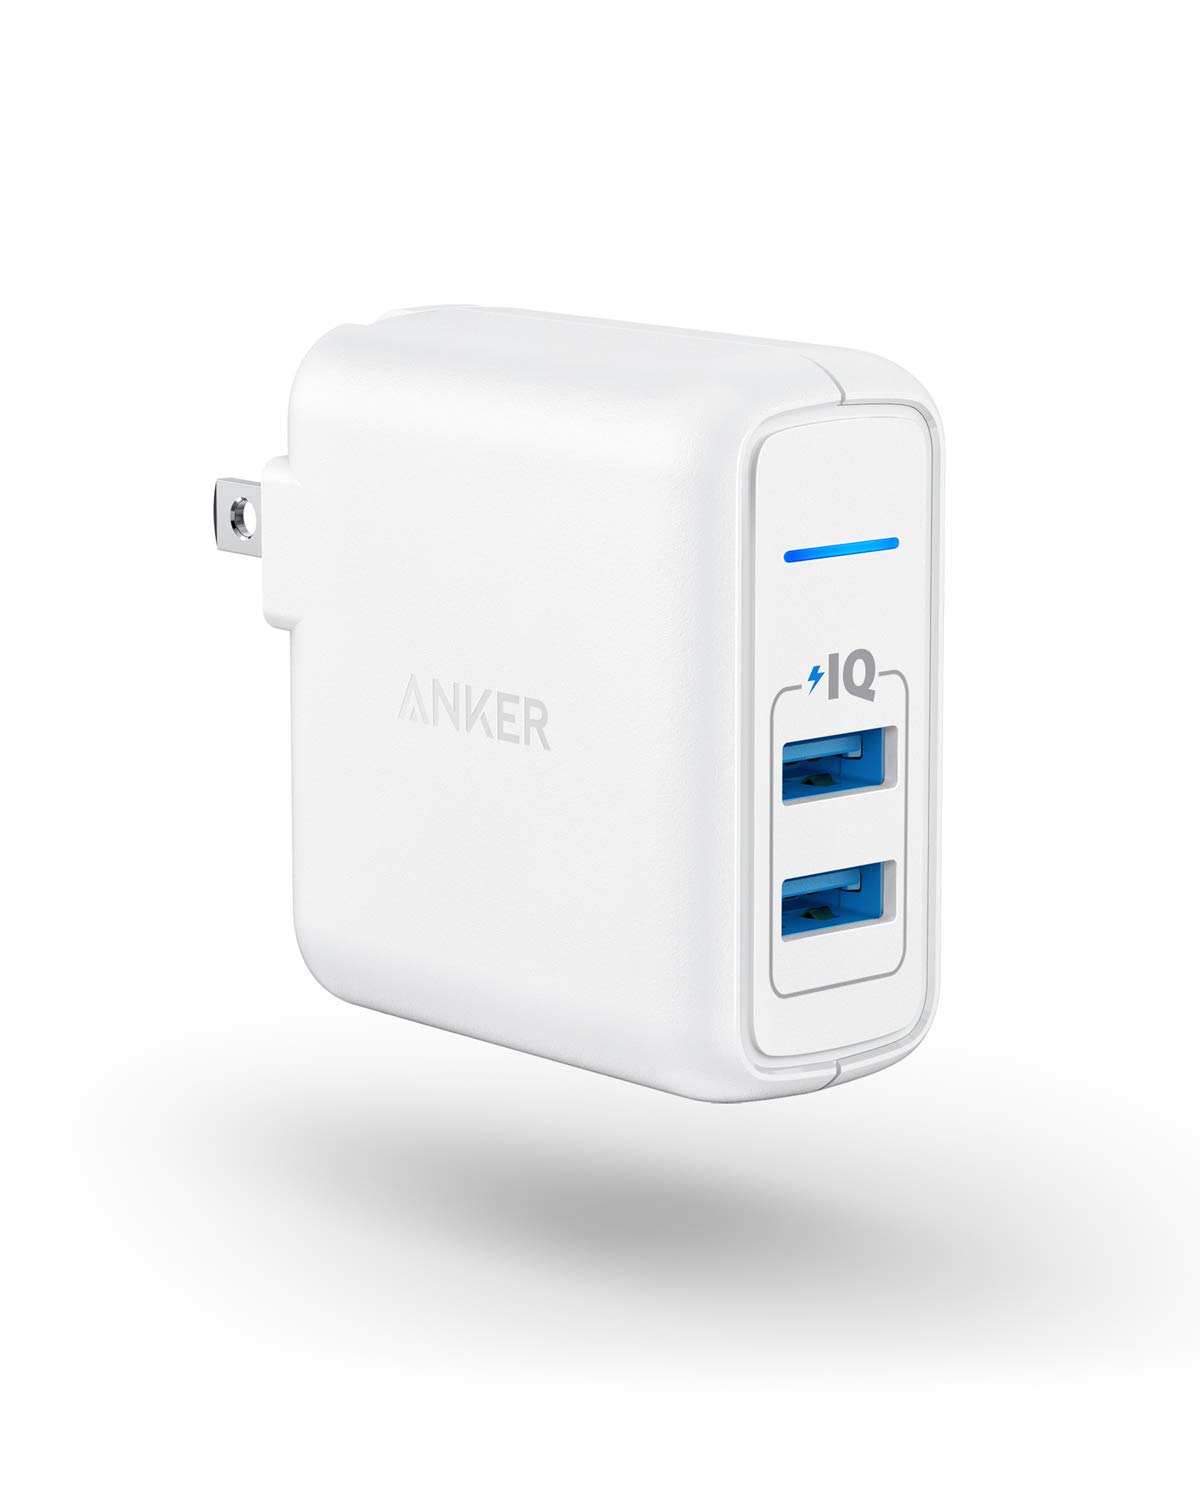 Book Cover USB Charger, Anker Elite Dual Port 24W Wall Charger, PowerPort 2 with PowerIQ and Foldable Plug, for iPhone 11/Xs/XS Max/XR/X/8/7/6/Plus, iPad Pro/Air 2/Mini 3/Mini 4, Samsung S4/S5, and More White